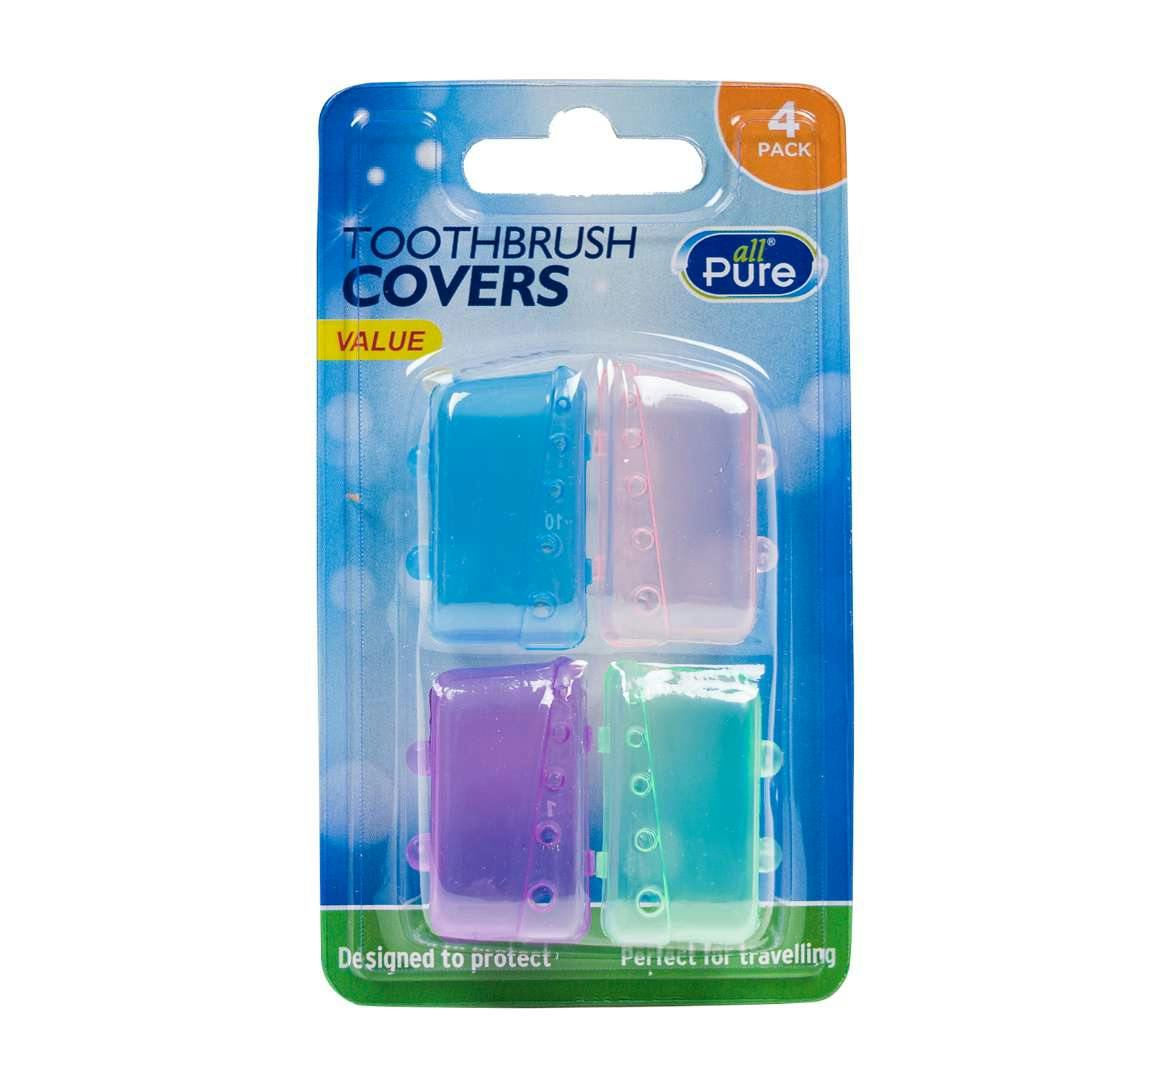 Toothbrush Covers - 4 Assorted Colors per Pack